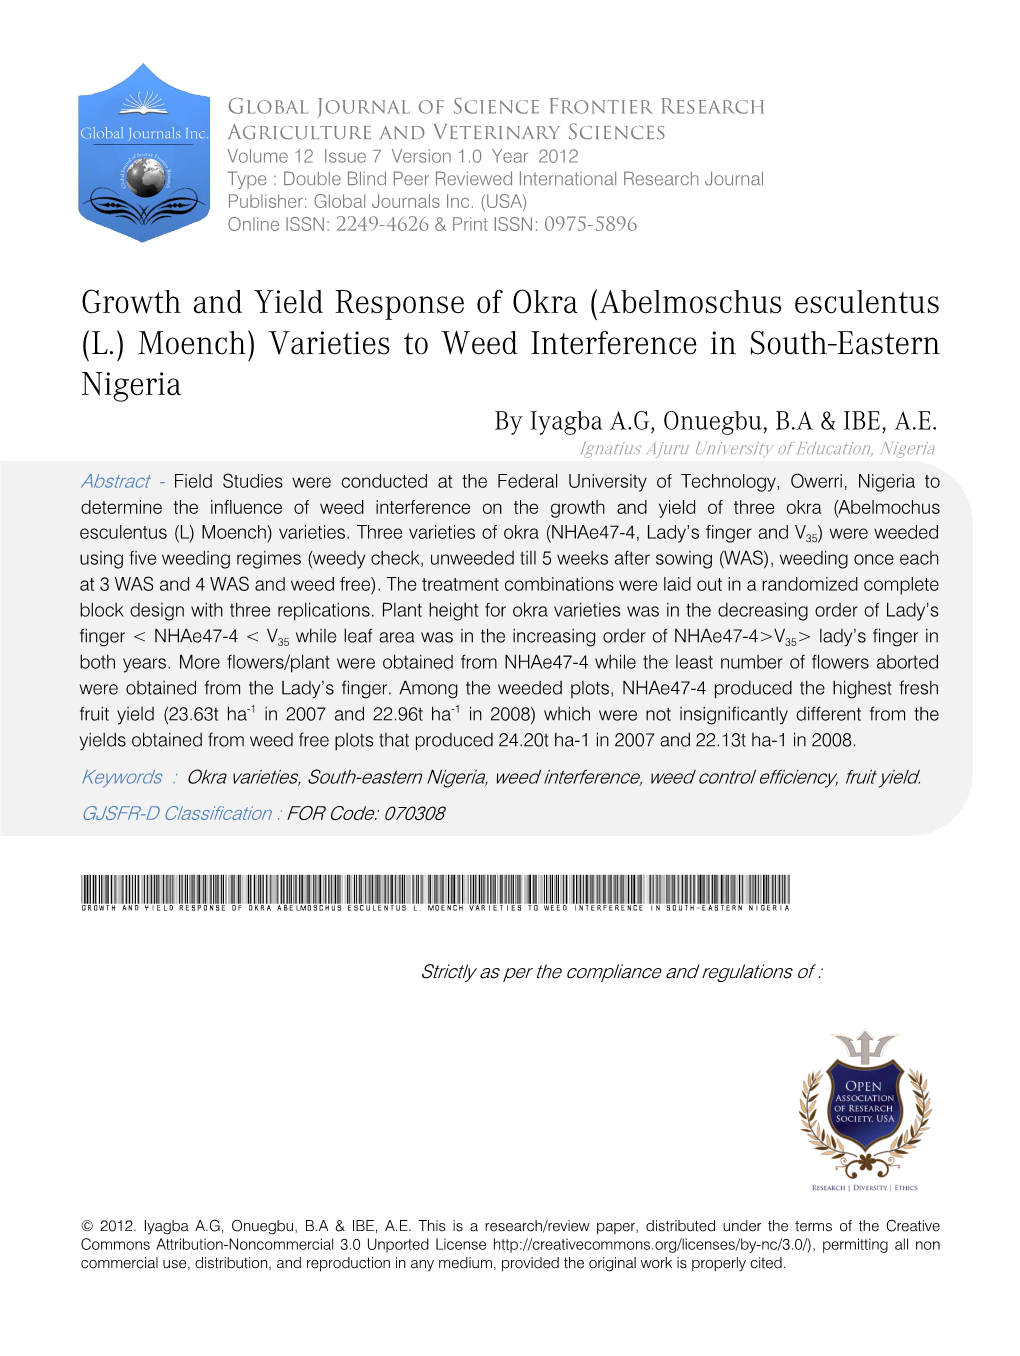 Growth and Yield Response of Okra (Abelmoschus Esculentus (L.) Moench) Varieties to Weed Interference in South-Eastern Nigeria by Iyagba A.G, Onuegbu, B.A & IBE, A.E